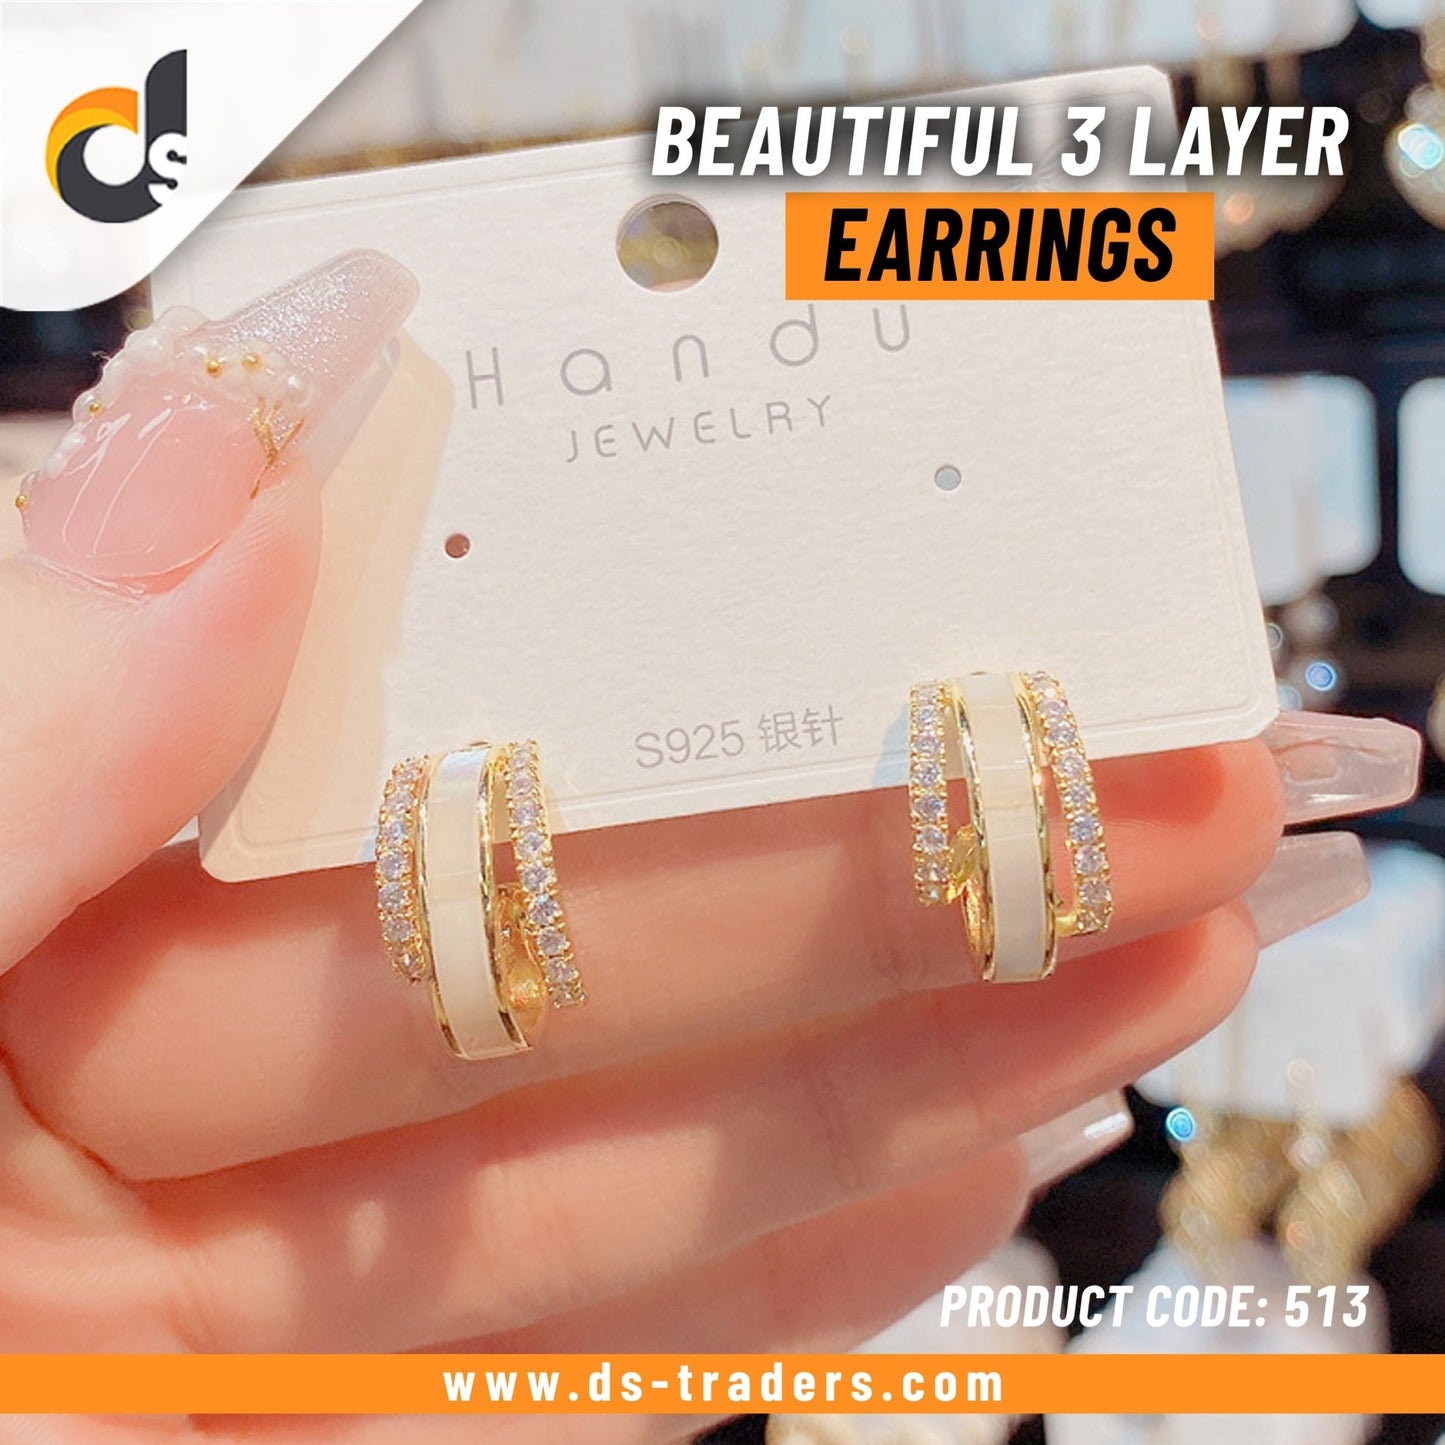 Beautiful 3 Layer Earrings - DS Traders